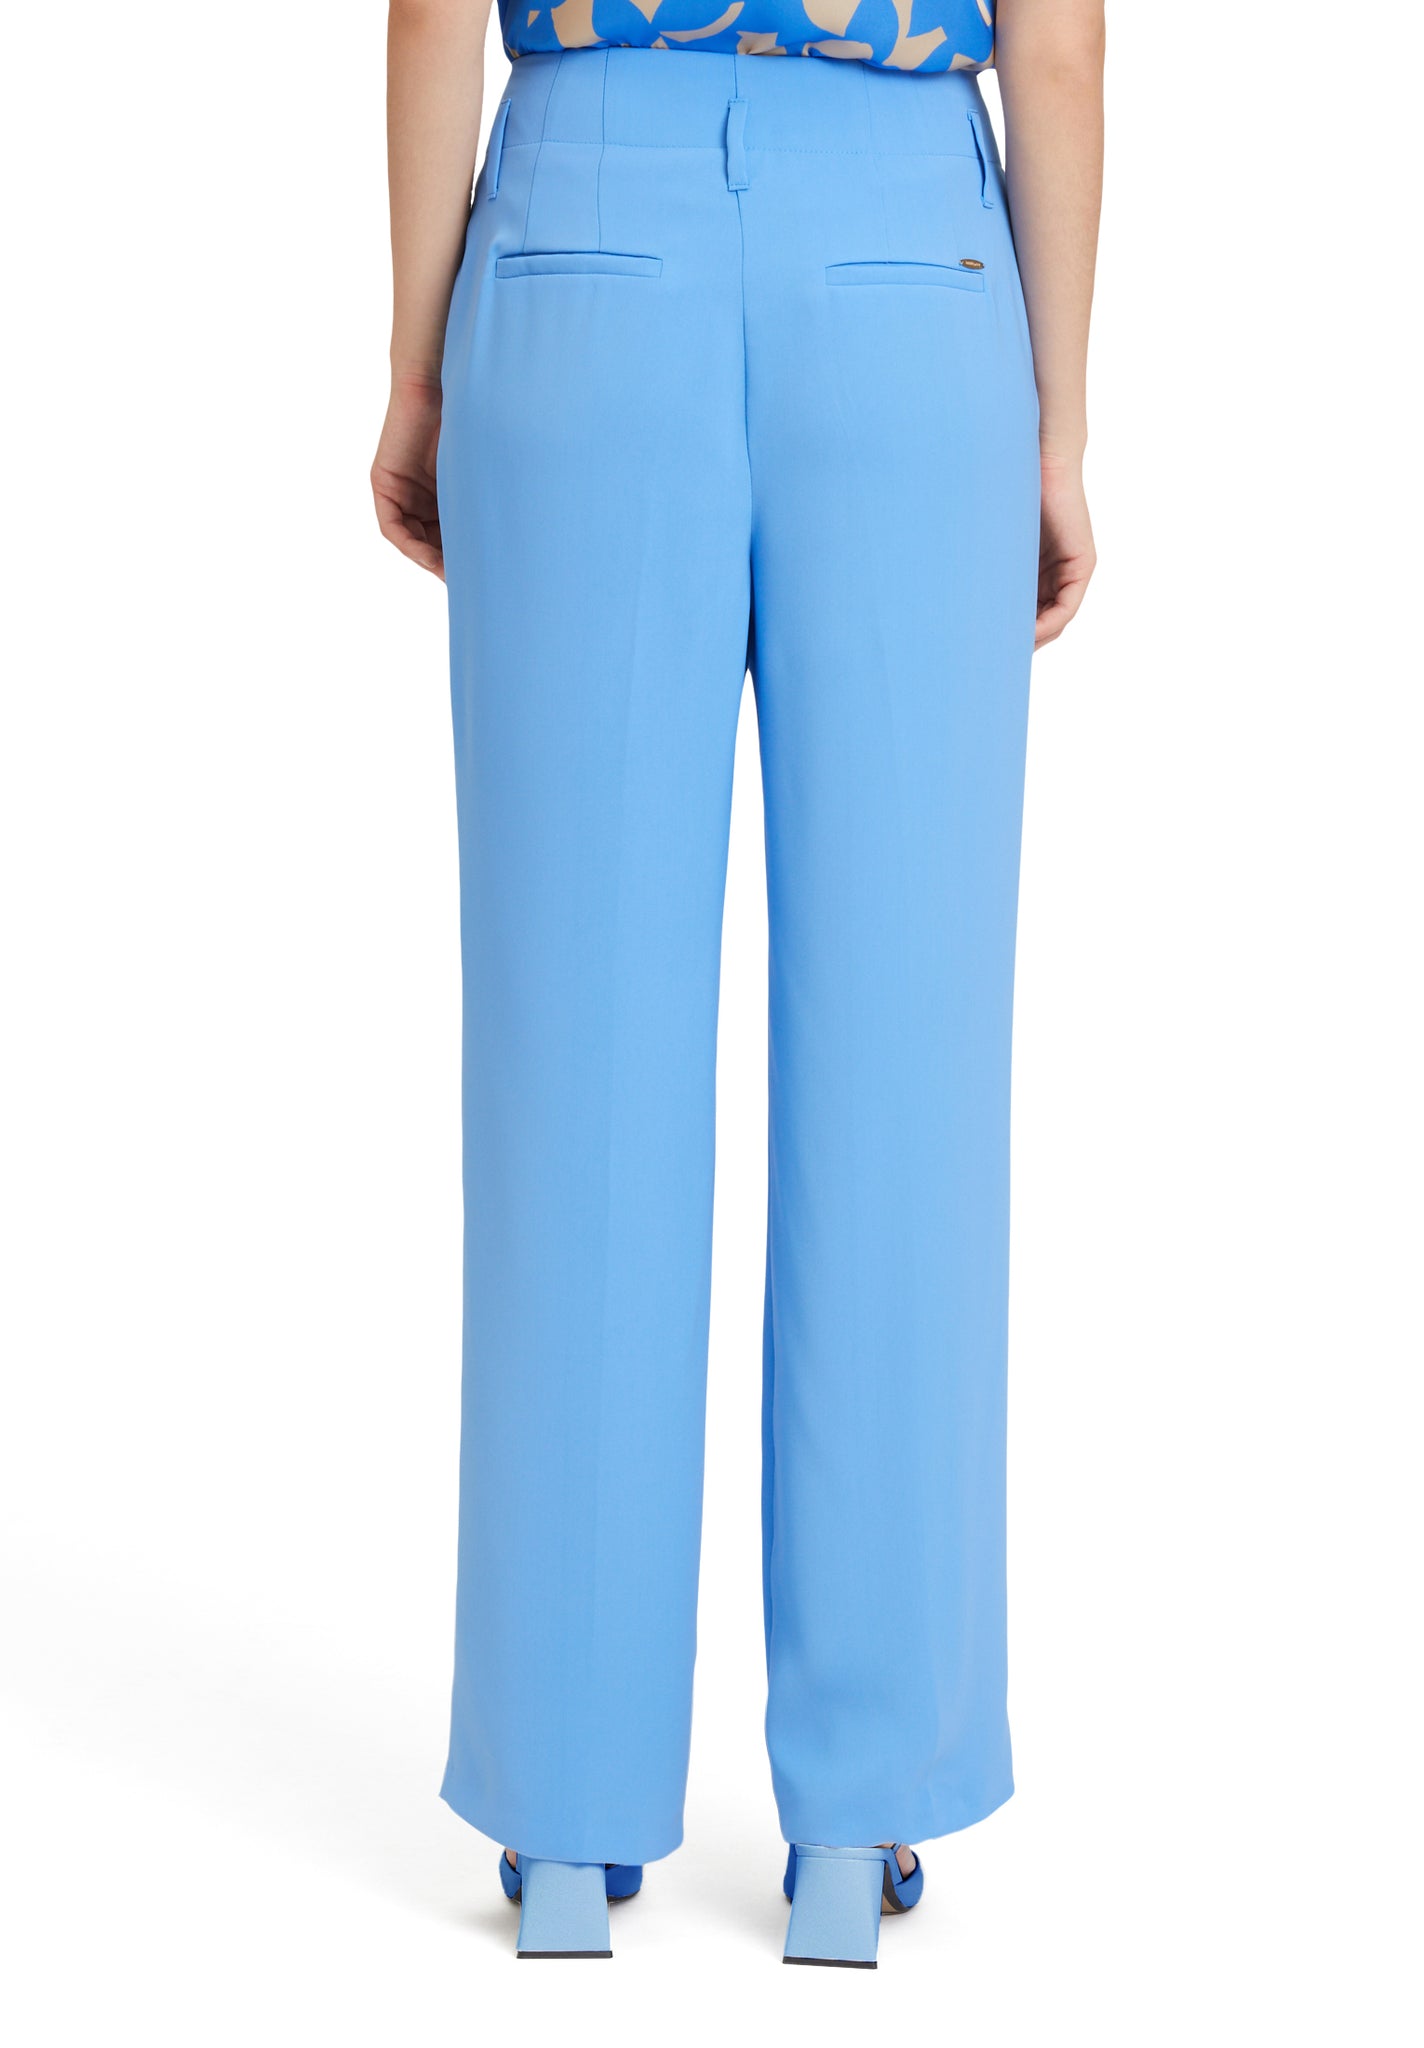 Betty & Co tailored high waist trousers in blue

Product code 6446/3101